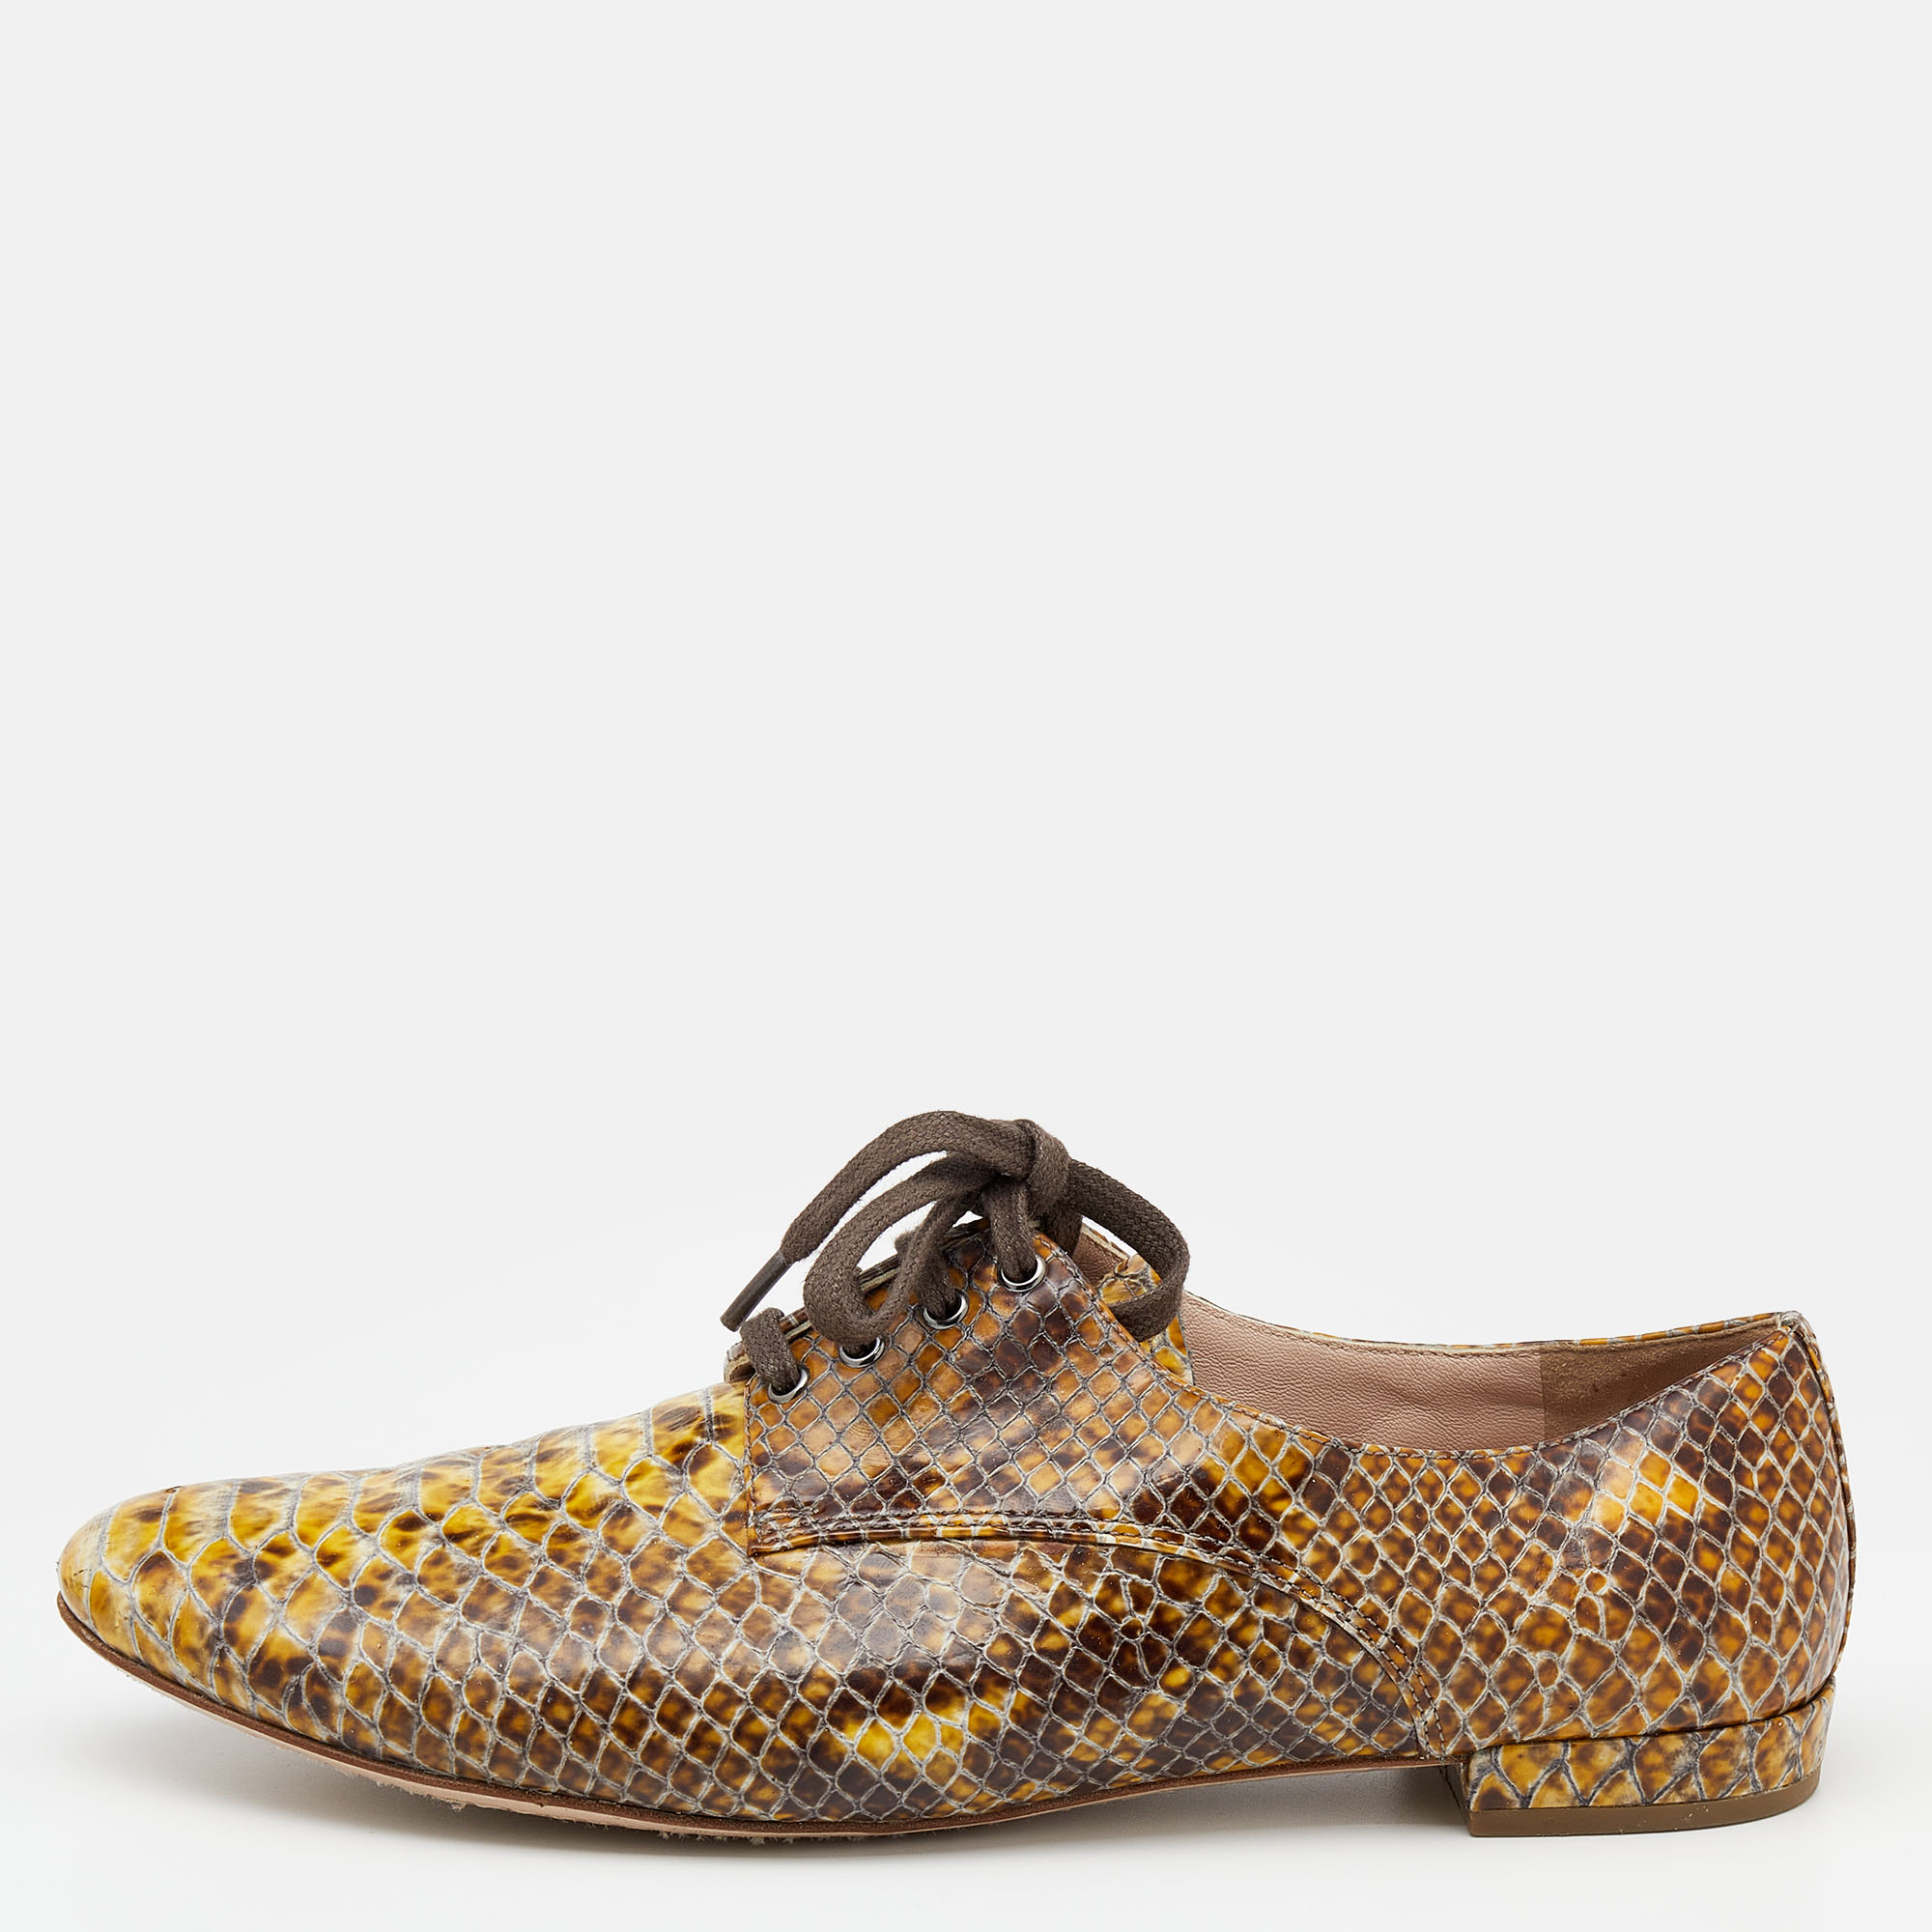 Pre-owned Miu Miu Yellow/brown Snakeskin Embossed Patent Leather Derby Size 39